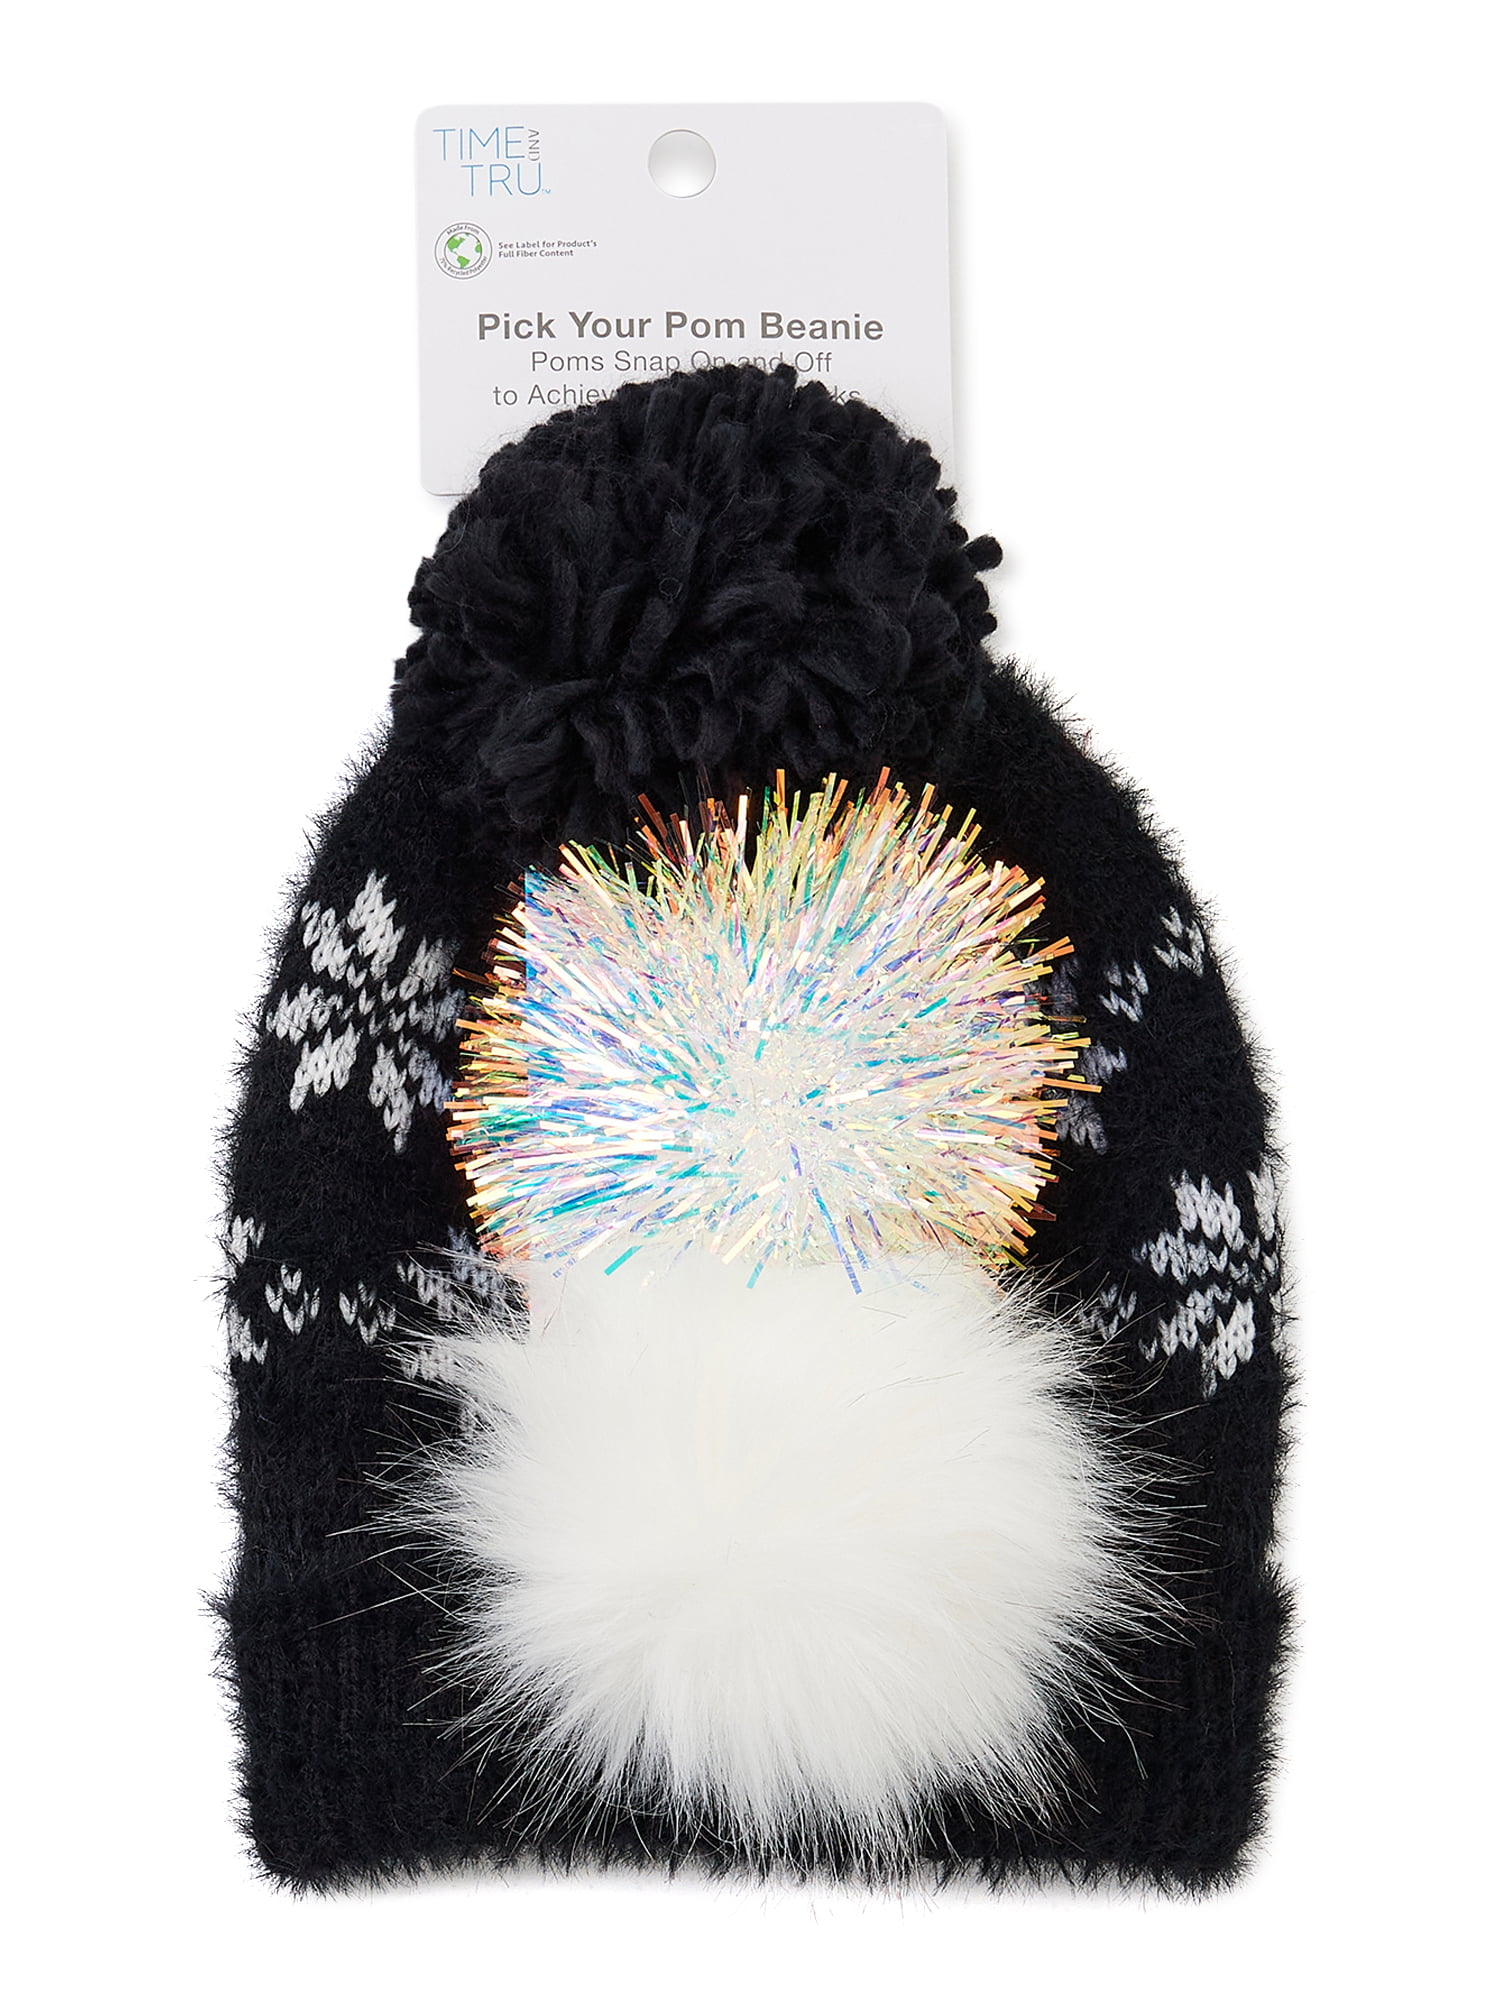 Pom-Poms! Perfect for your hat? — Truly Myrtle